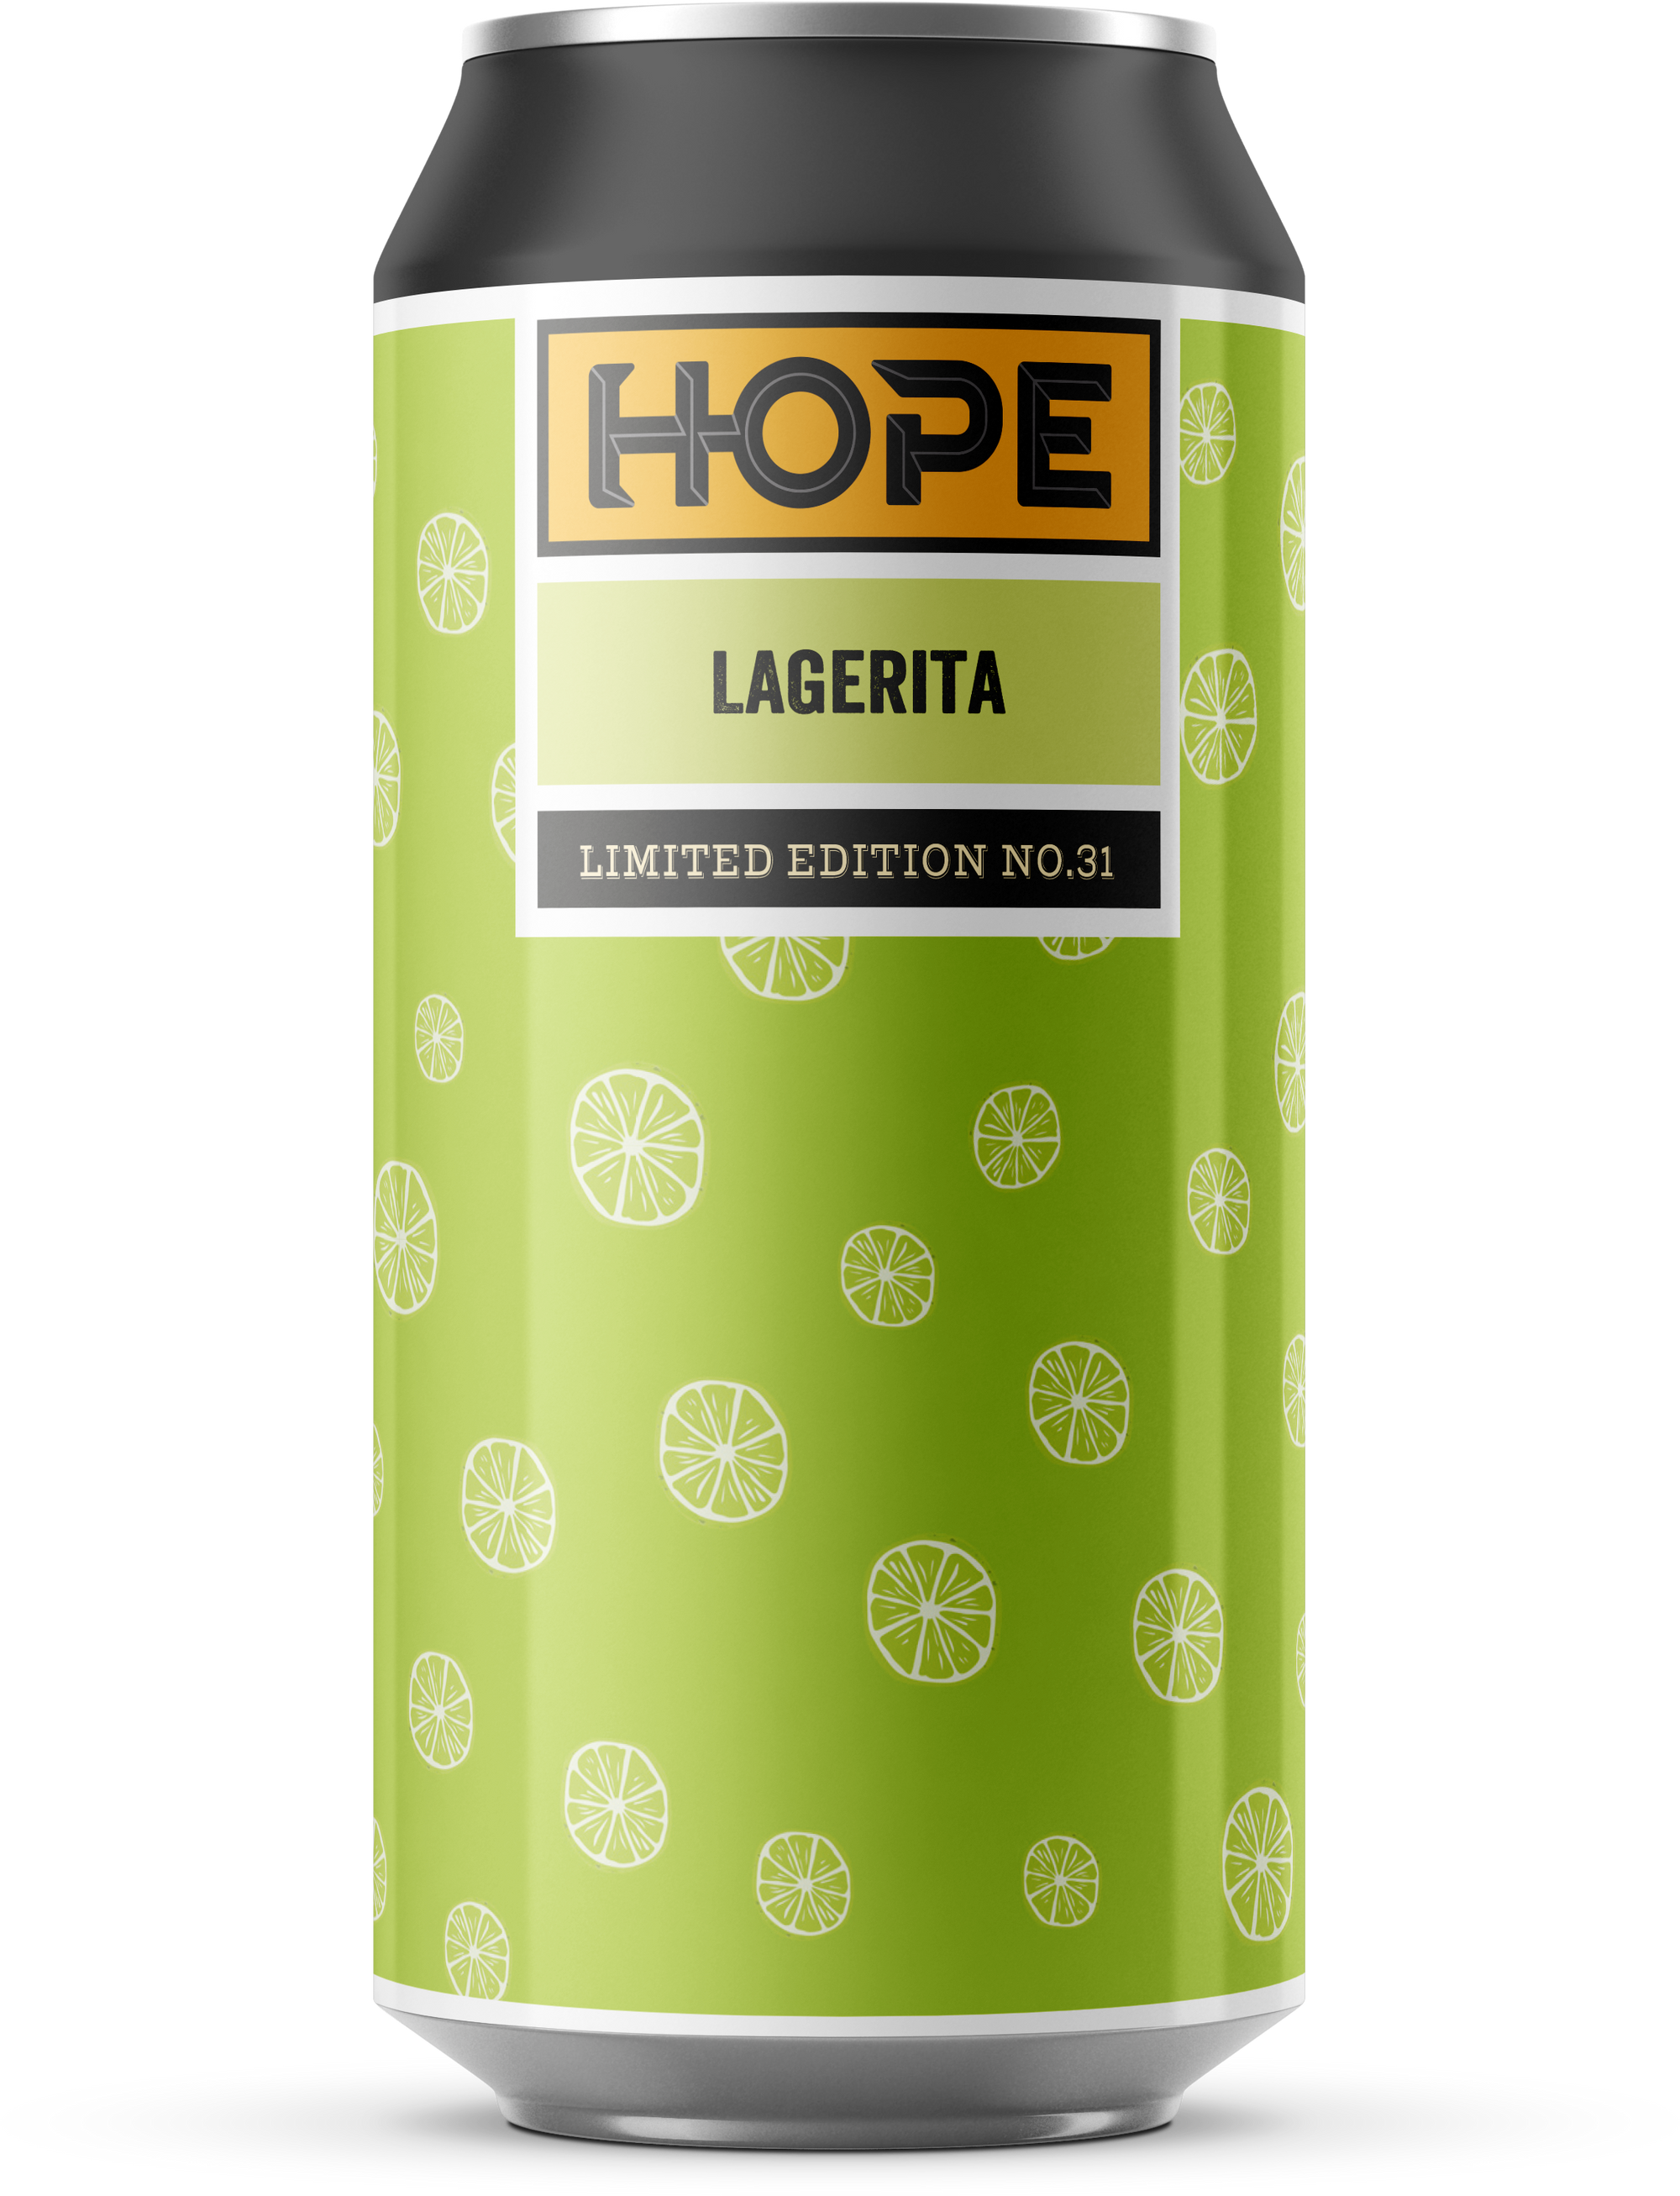 Hope- Lagerita Limited Edition no.31 5.0% ABV 440ml Can